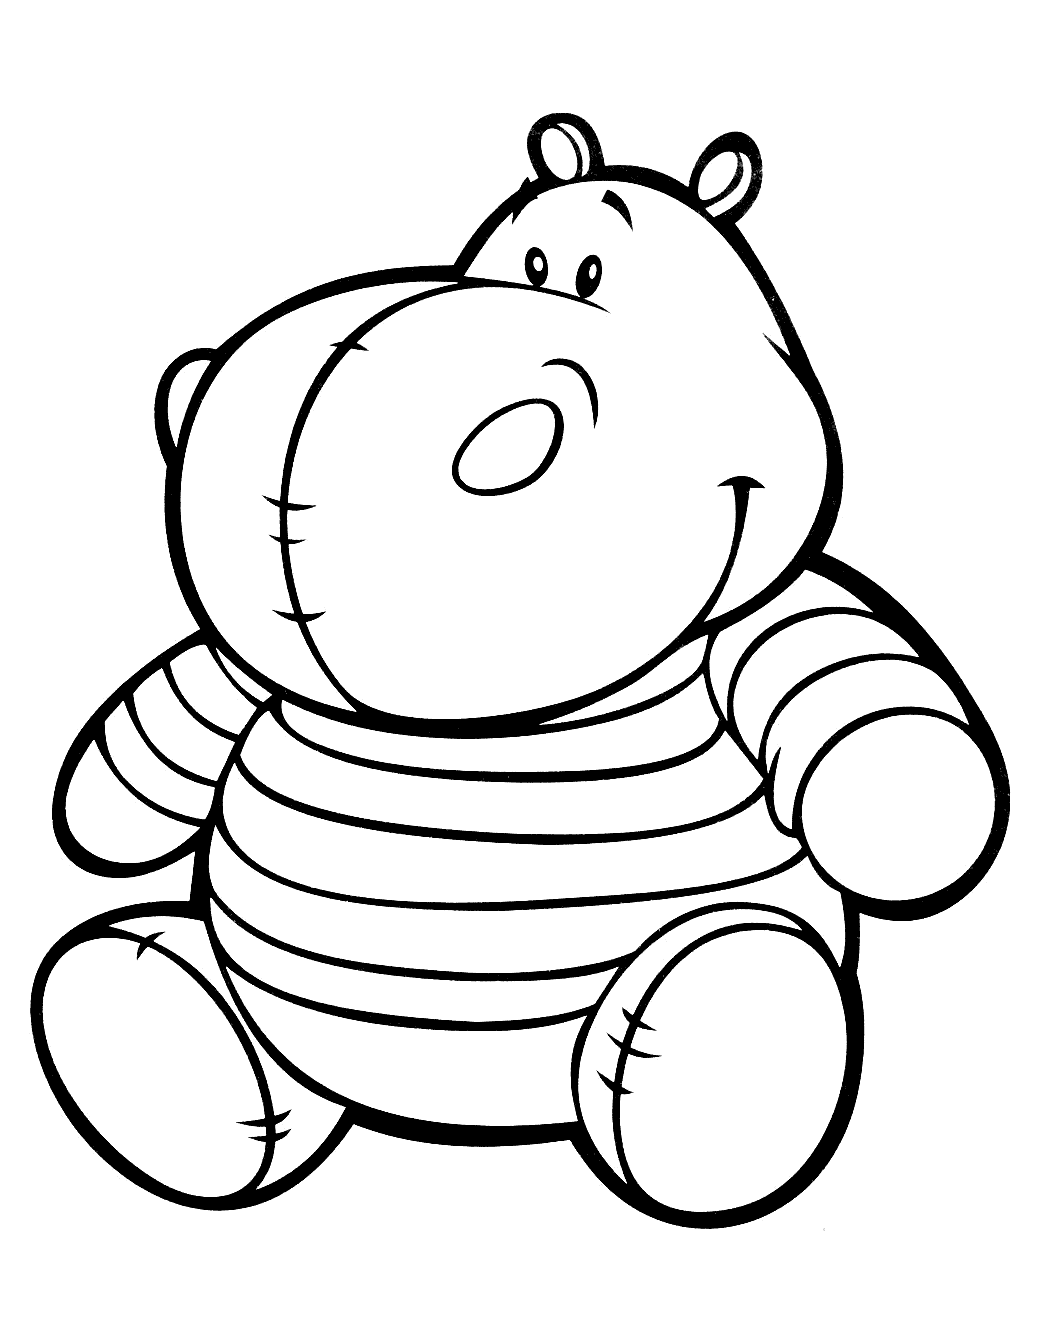 Coloring page - Hippo